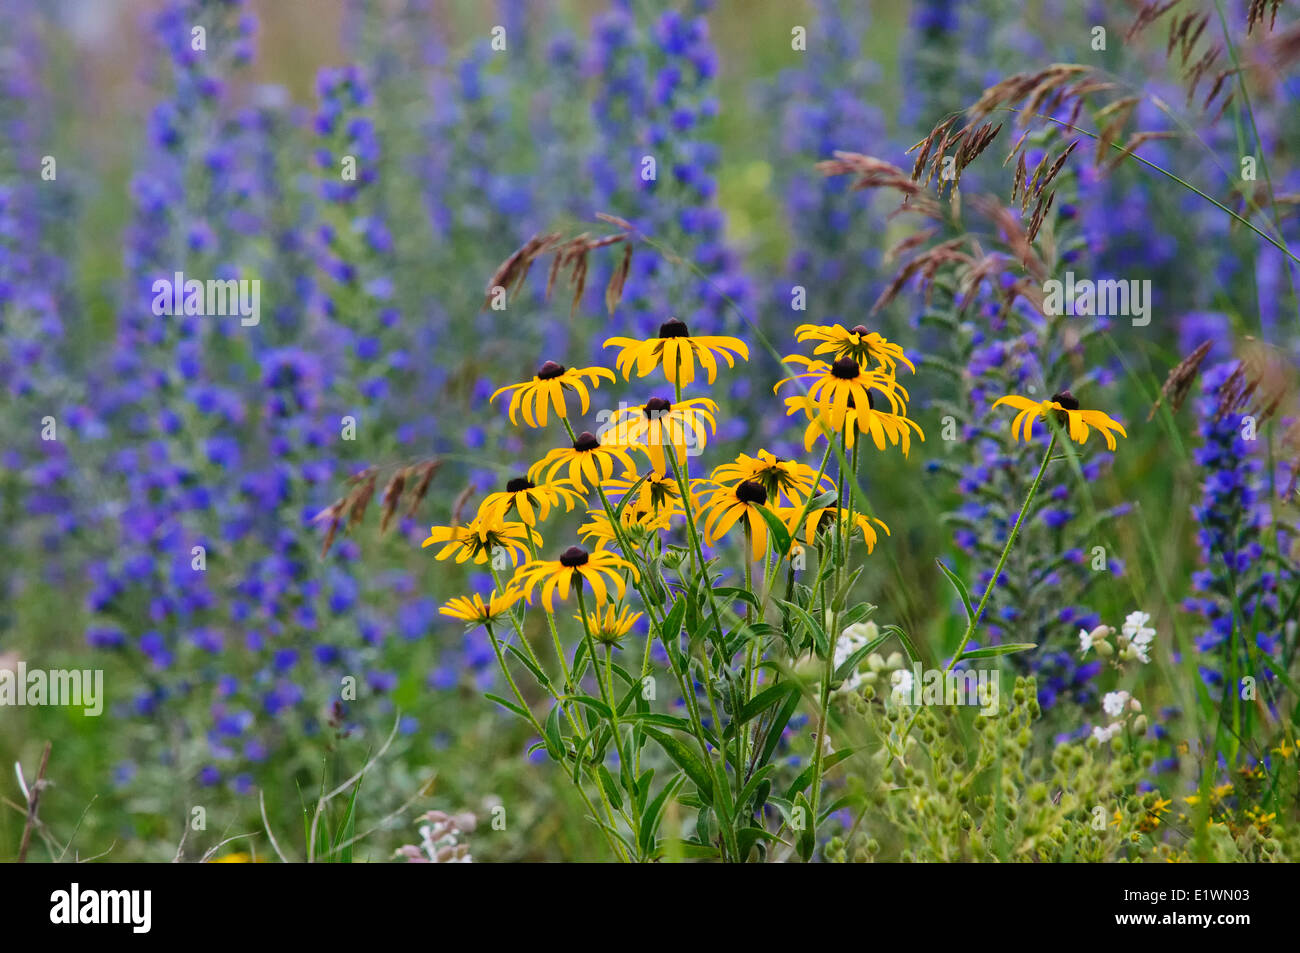 Brown-eyed Susans (Rudbeckia triloba) and Vetch (Astragalus sp.) in late summer, Hockley Hills, Ontario, Canada Stock Photo